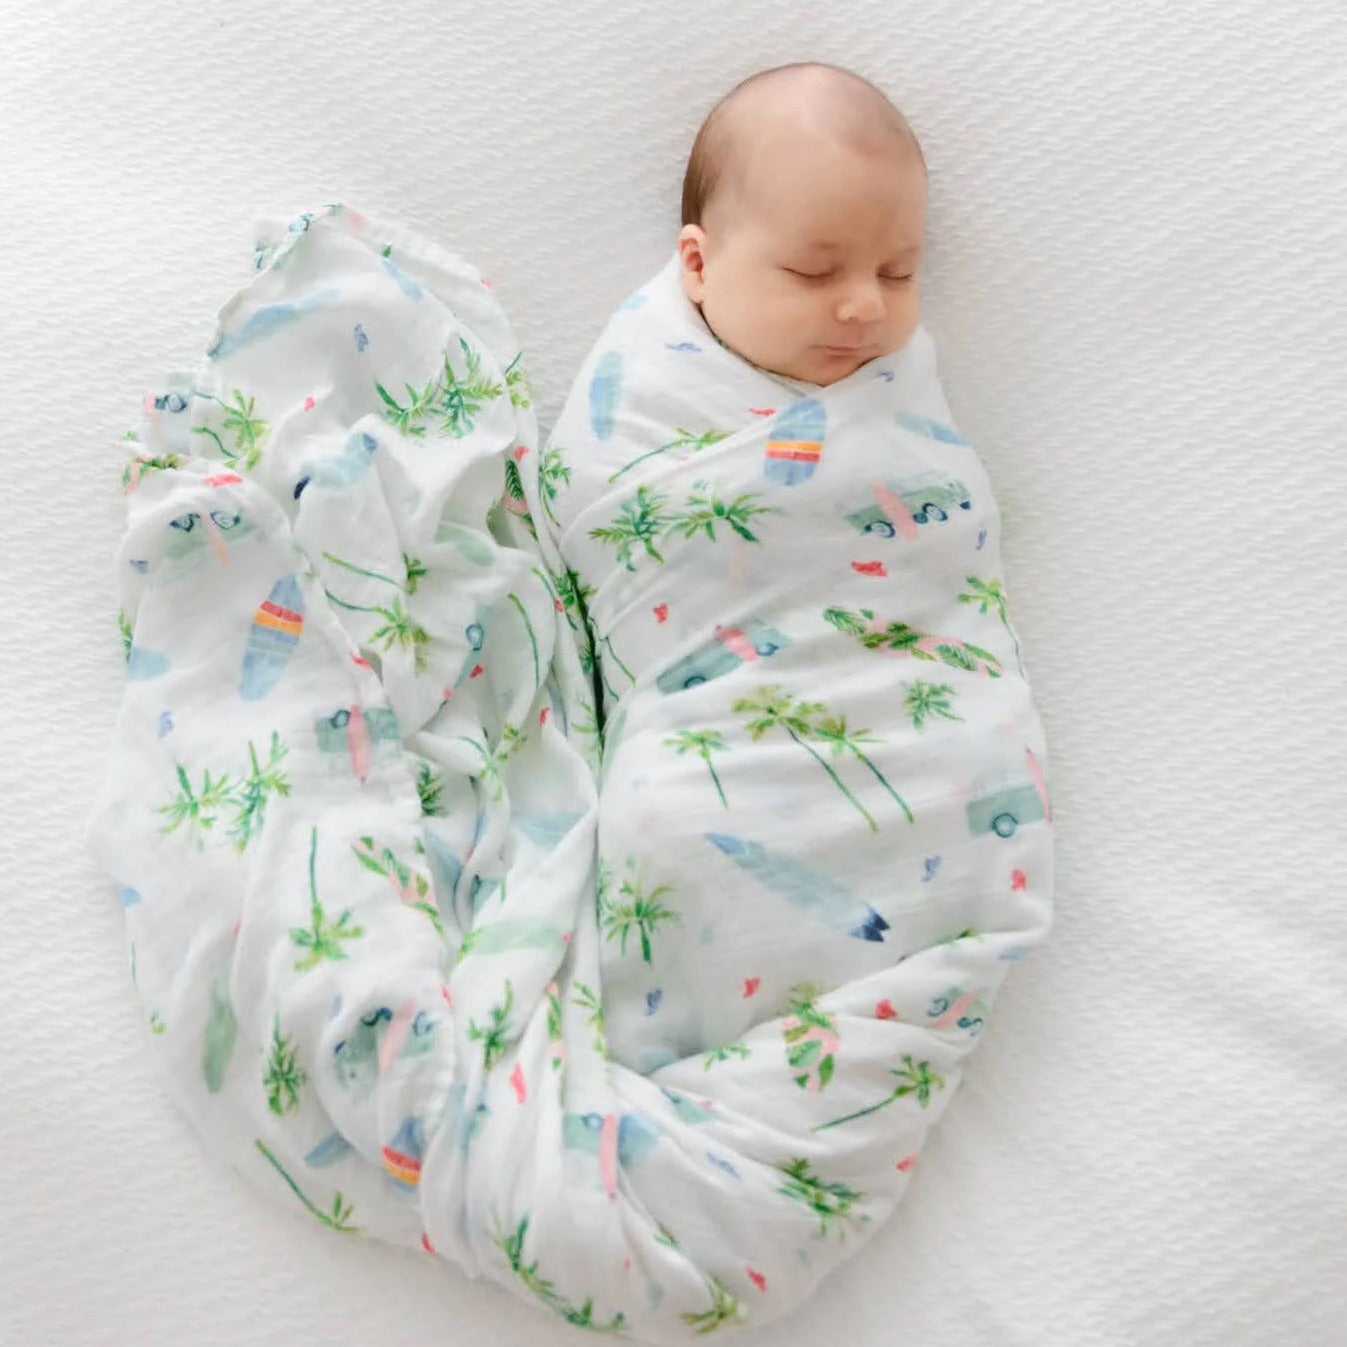 Anchor and Arrow Muslin Swaddle - Chasing Waves